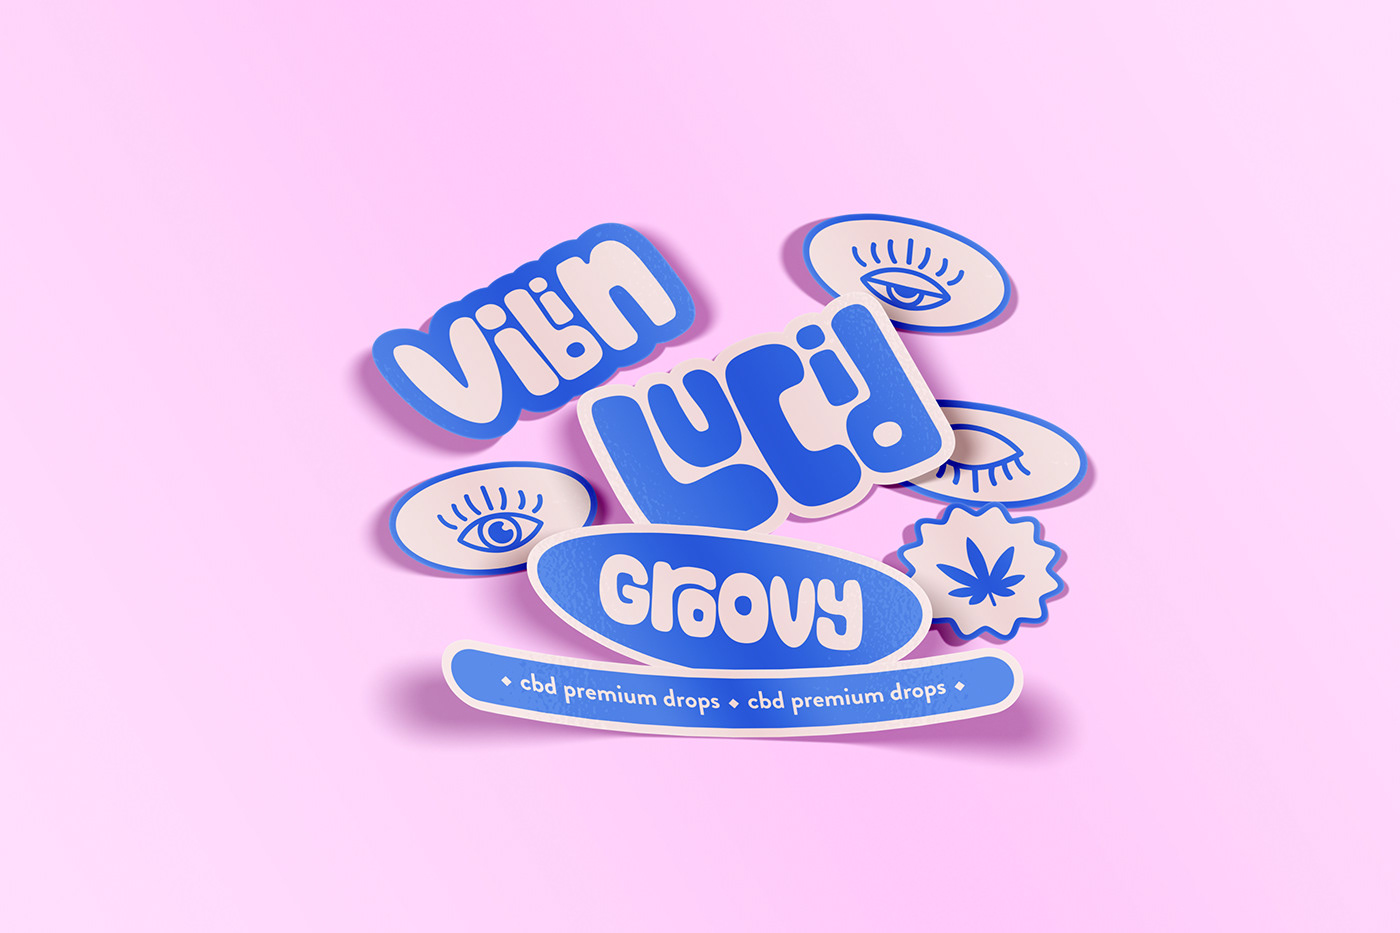 sticker design with the words lucid, vibing, groovy and includes icons such as multiple eyes.